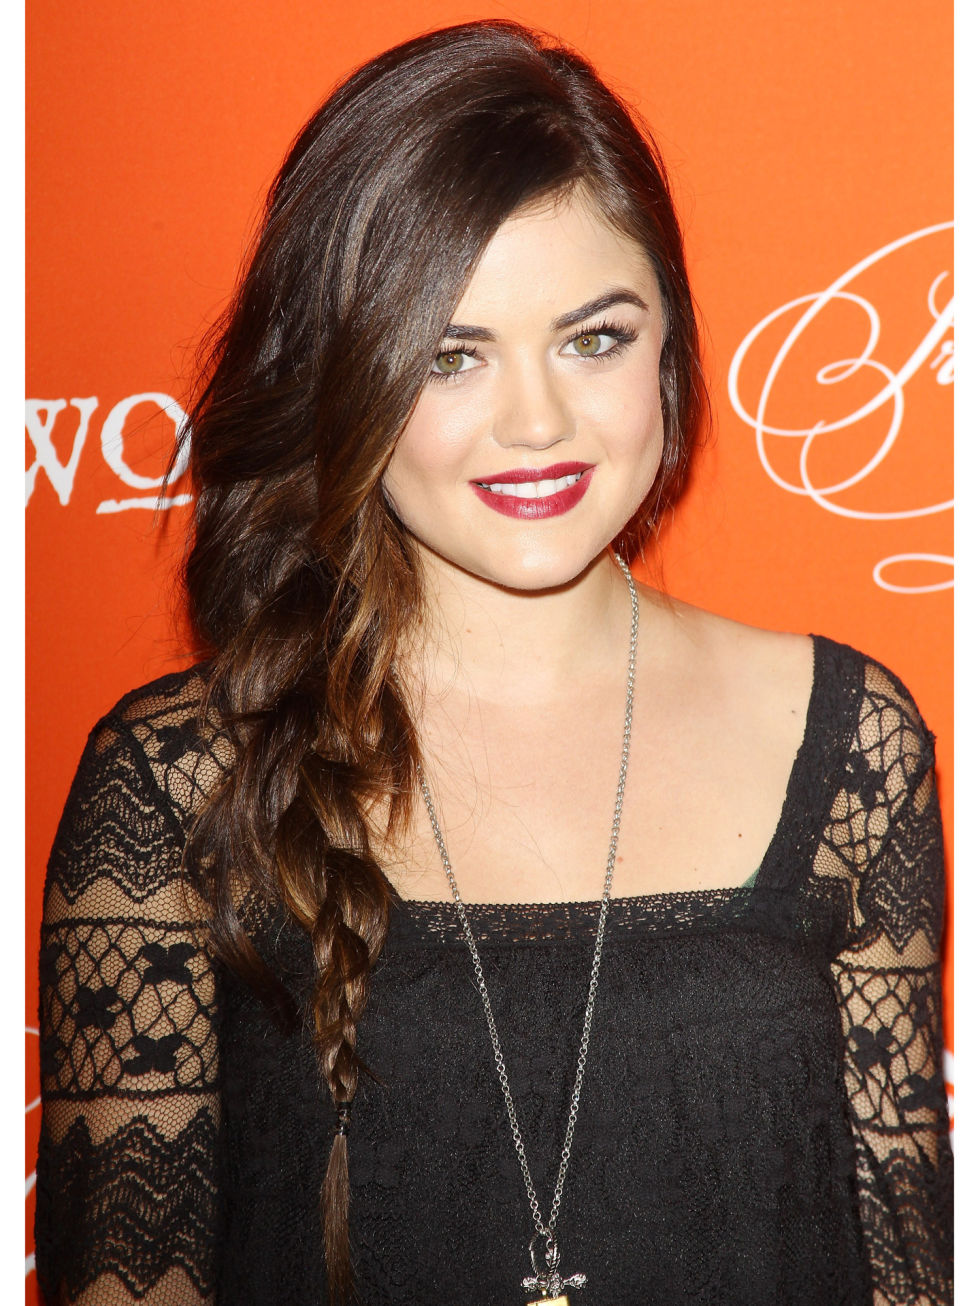 Picture Of Lucy Hale In General Pictures Lucy Hale 1447600114 Teen Idols 4 You 